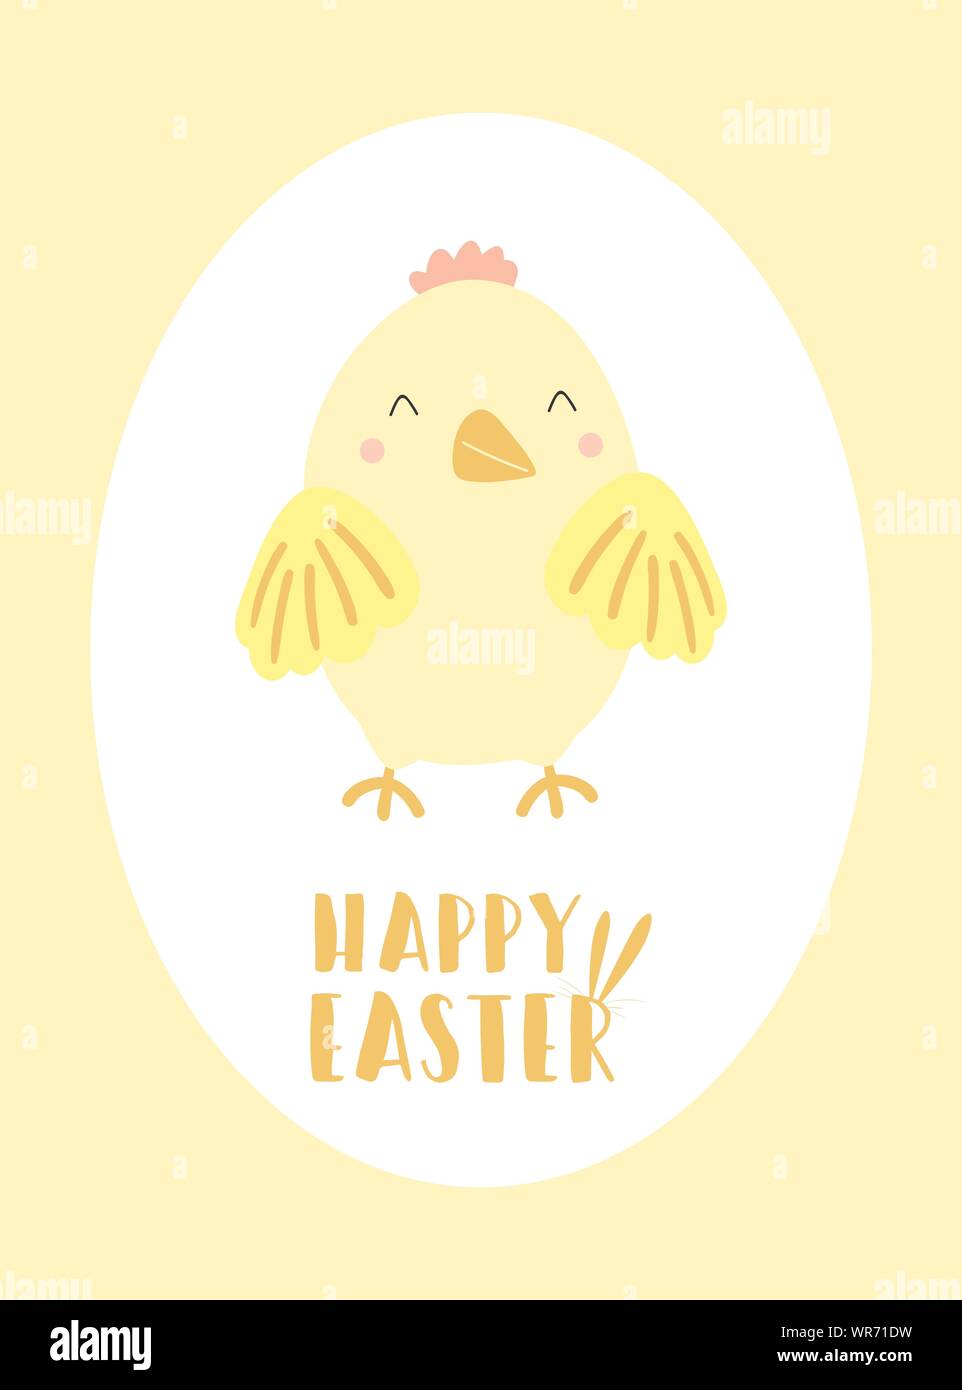 Vector image of a cute chick with an inscription on a yellow background. Hand-drawn Easter illustration of a chicken for spring happy holidays, summer Stock Vector